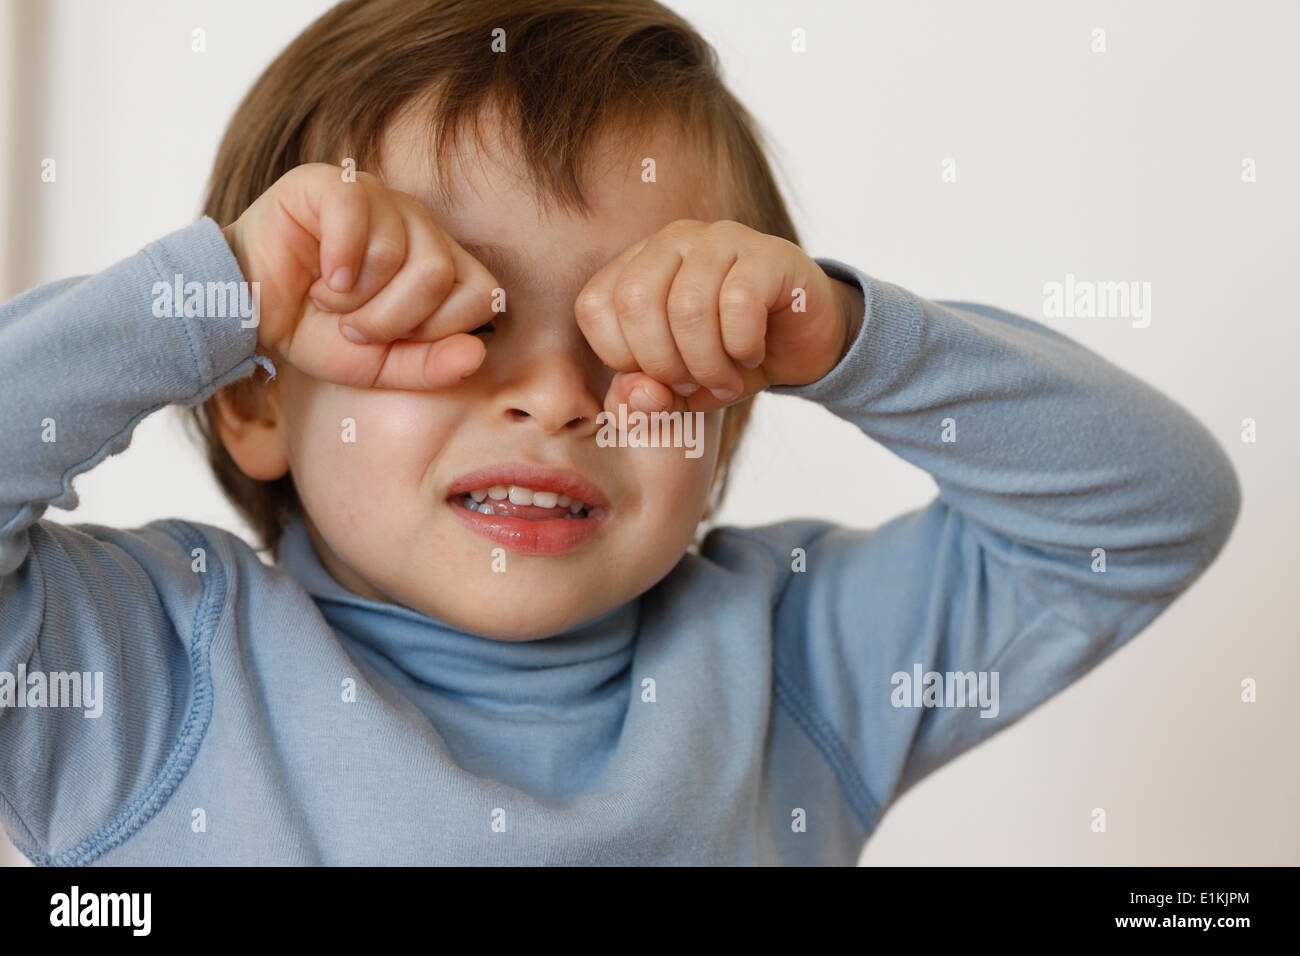 3-year-old boy rubbing his eyes Stock Photo